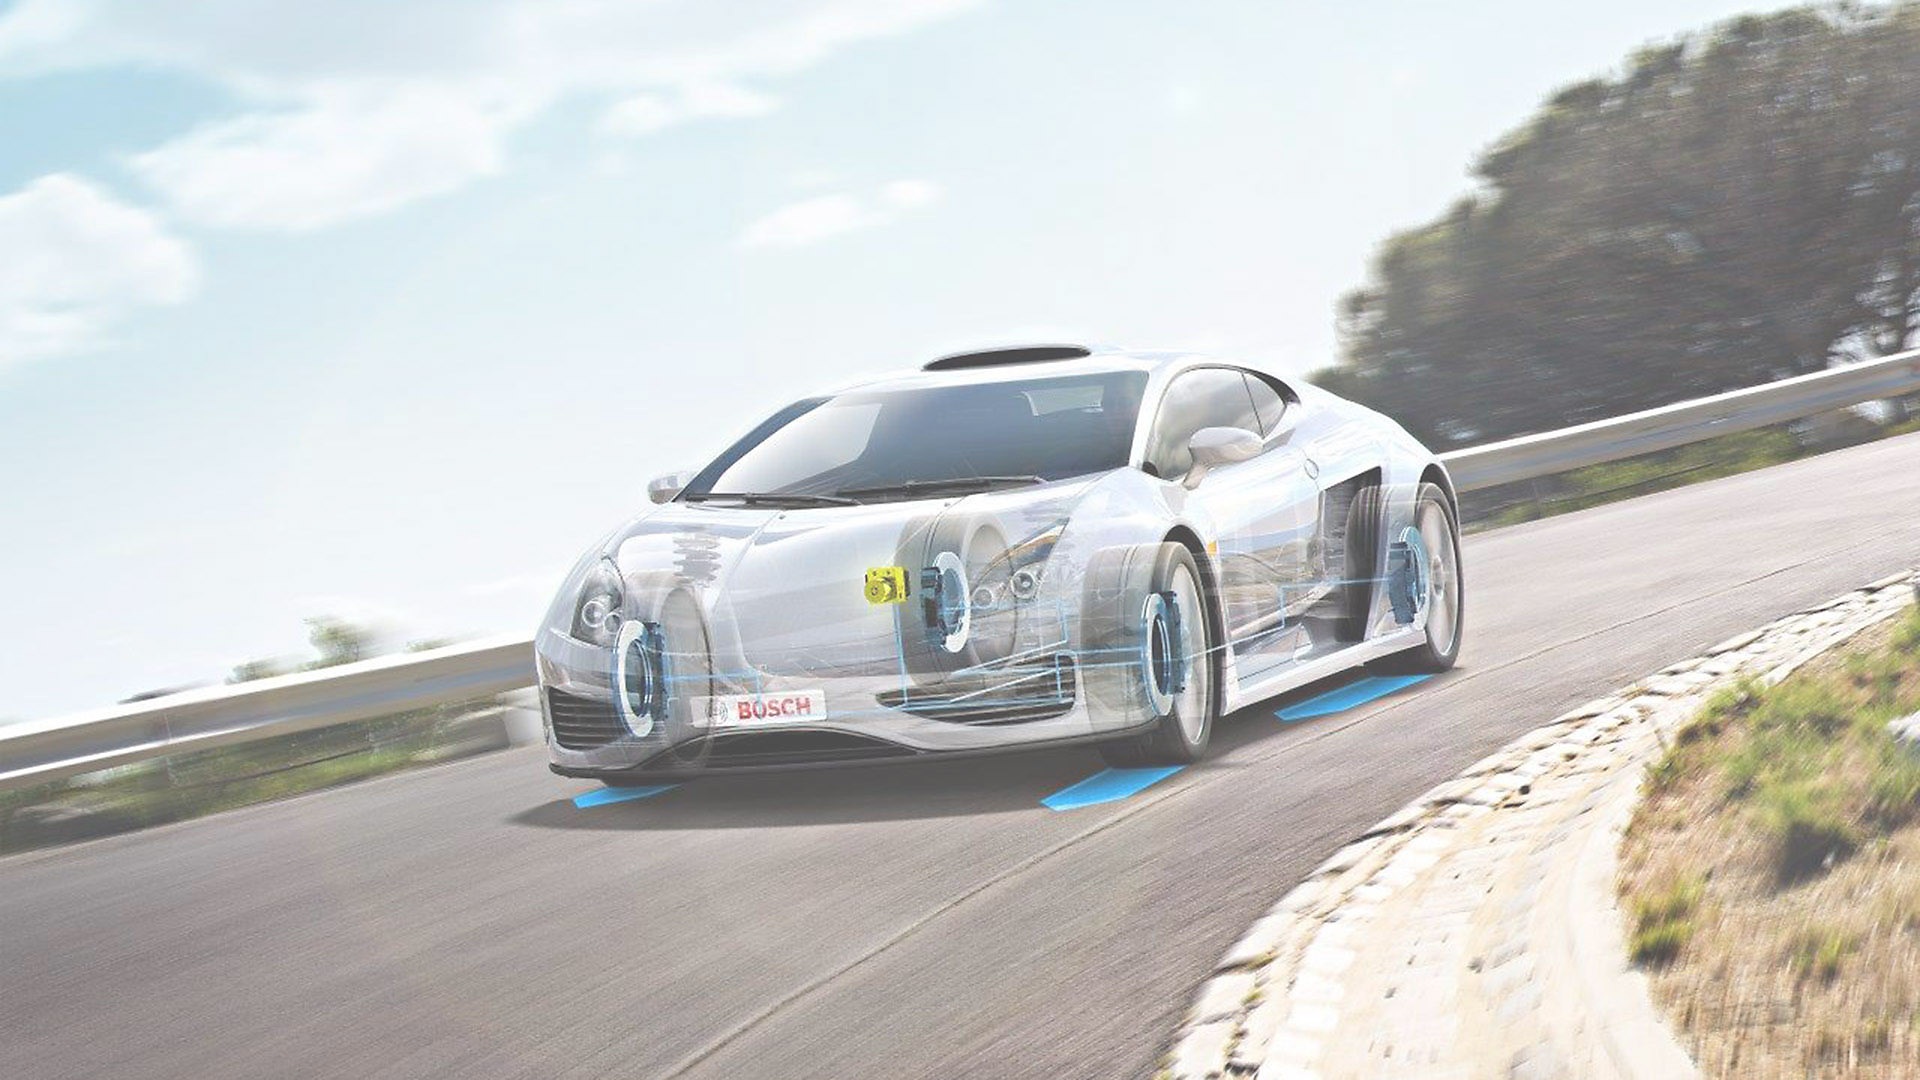 A photorealistic rendering of a sports car and its internal workings turning a corner.